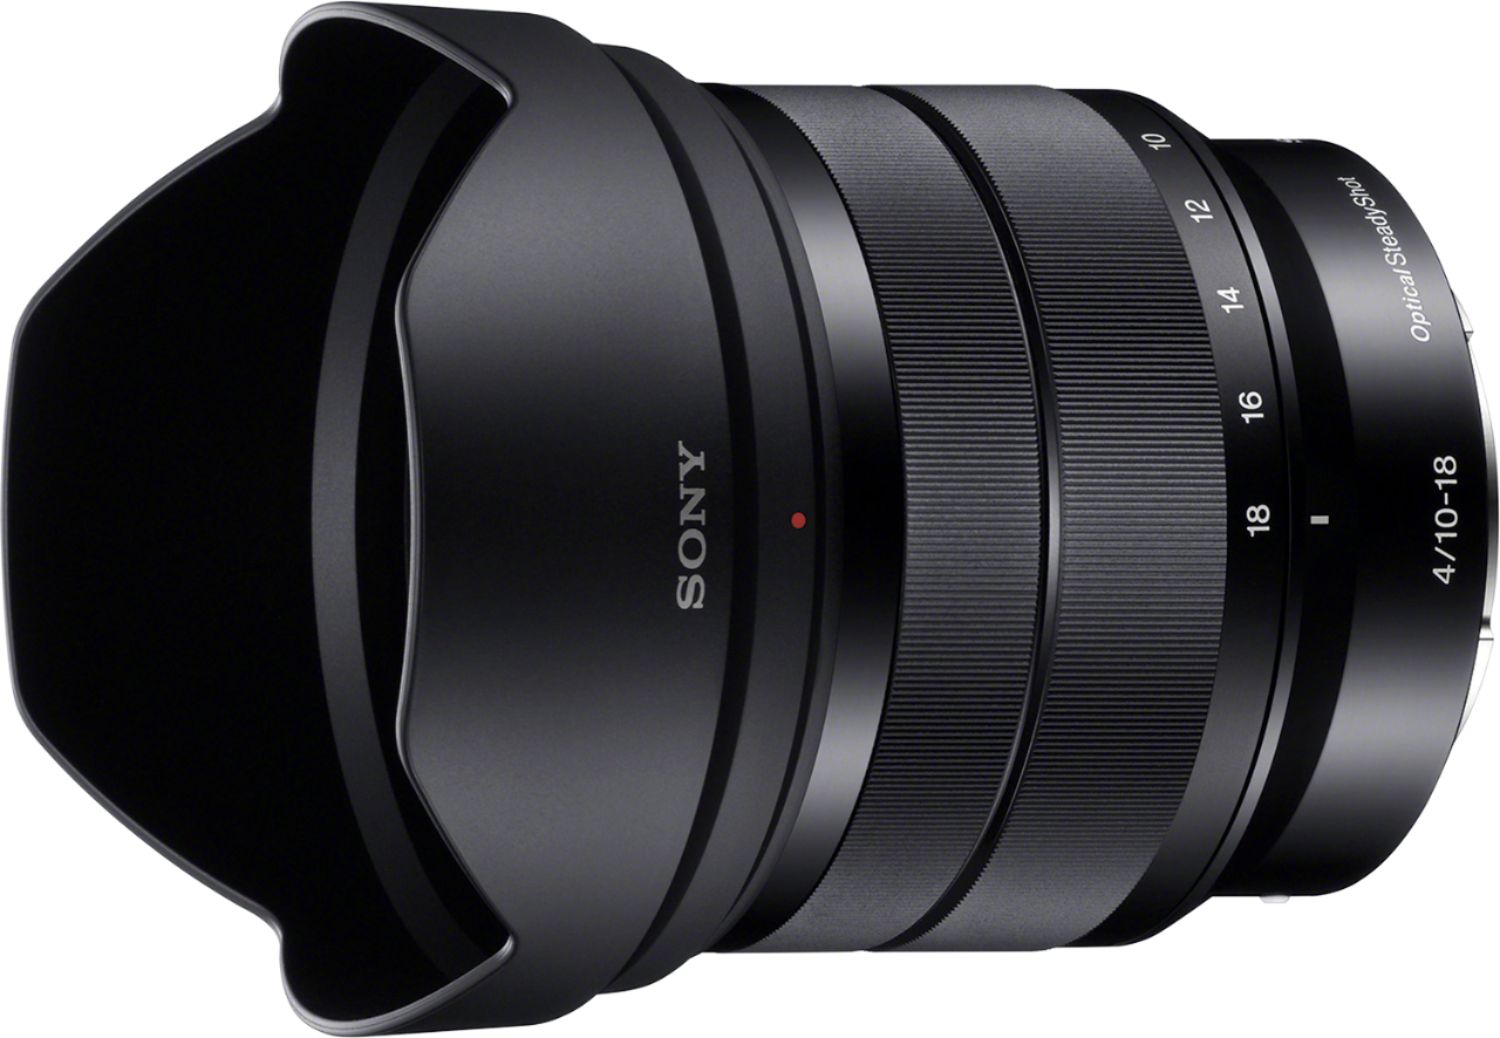 Left View: Canon - EF 200-400mm f/4L IS USM Super Telephoto Lens for Most EOS SLR Cameras - White